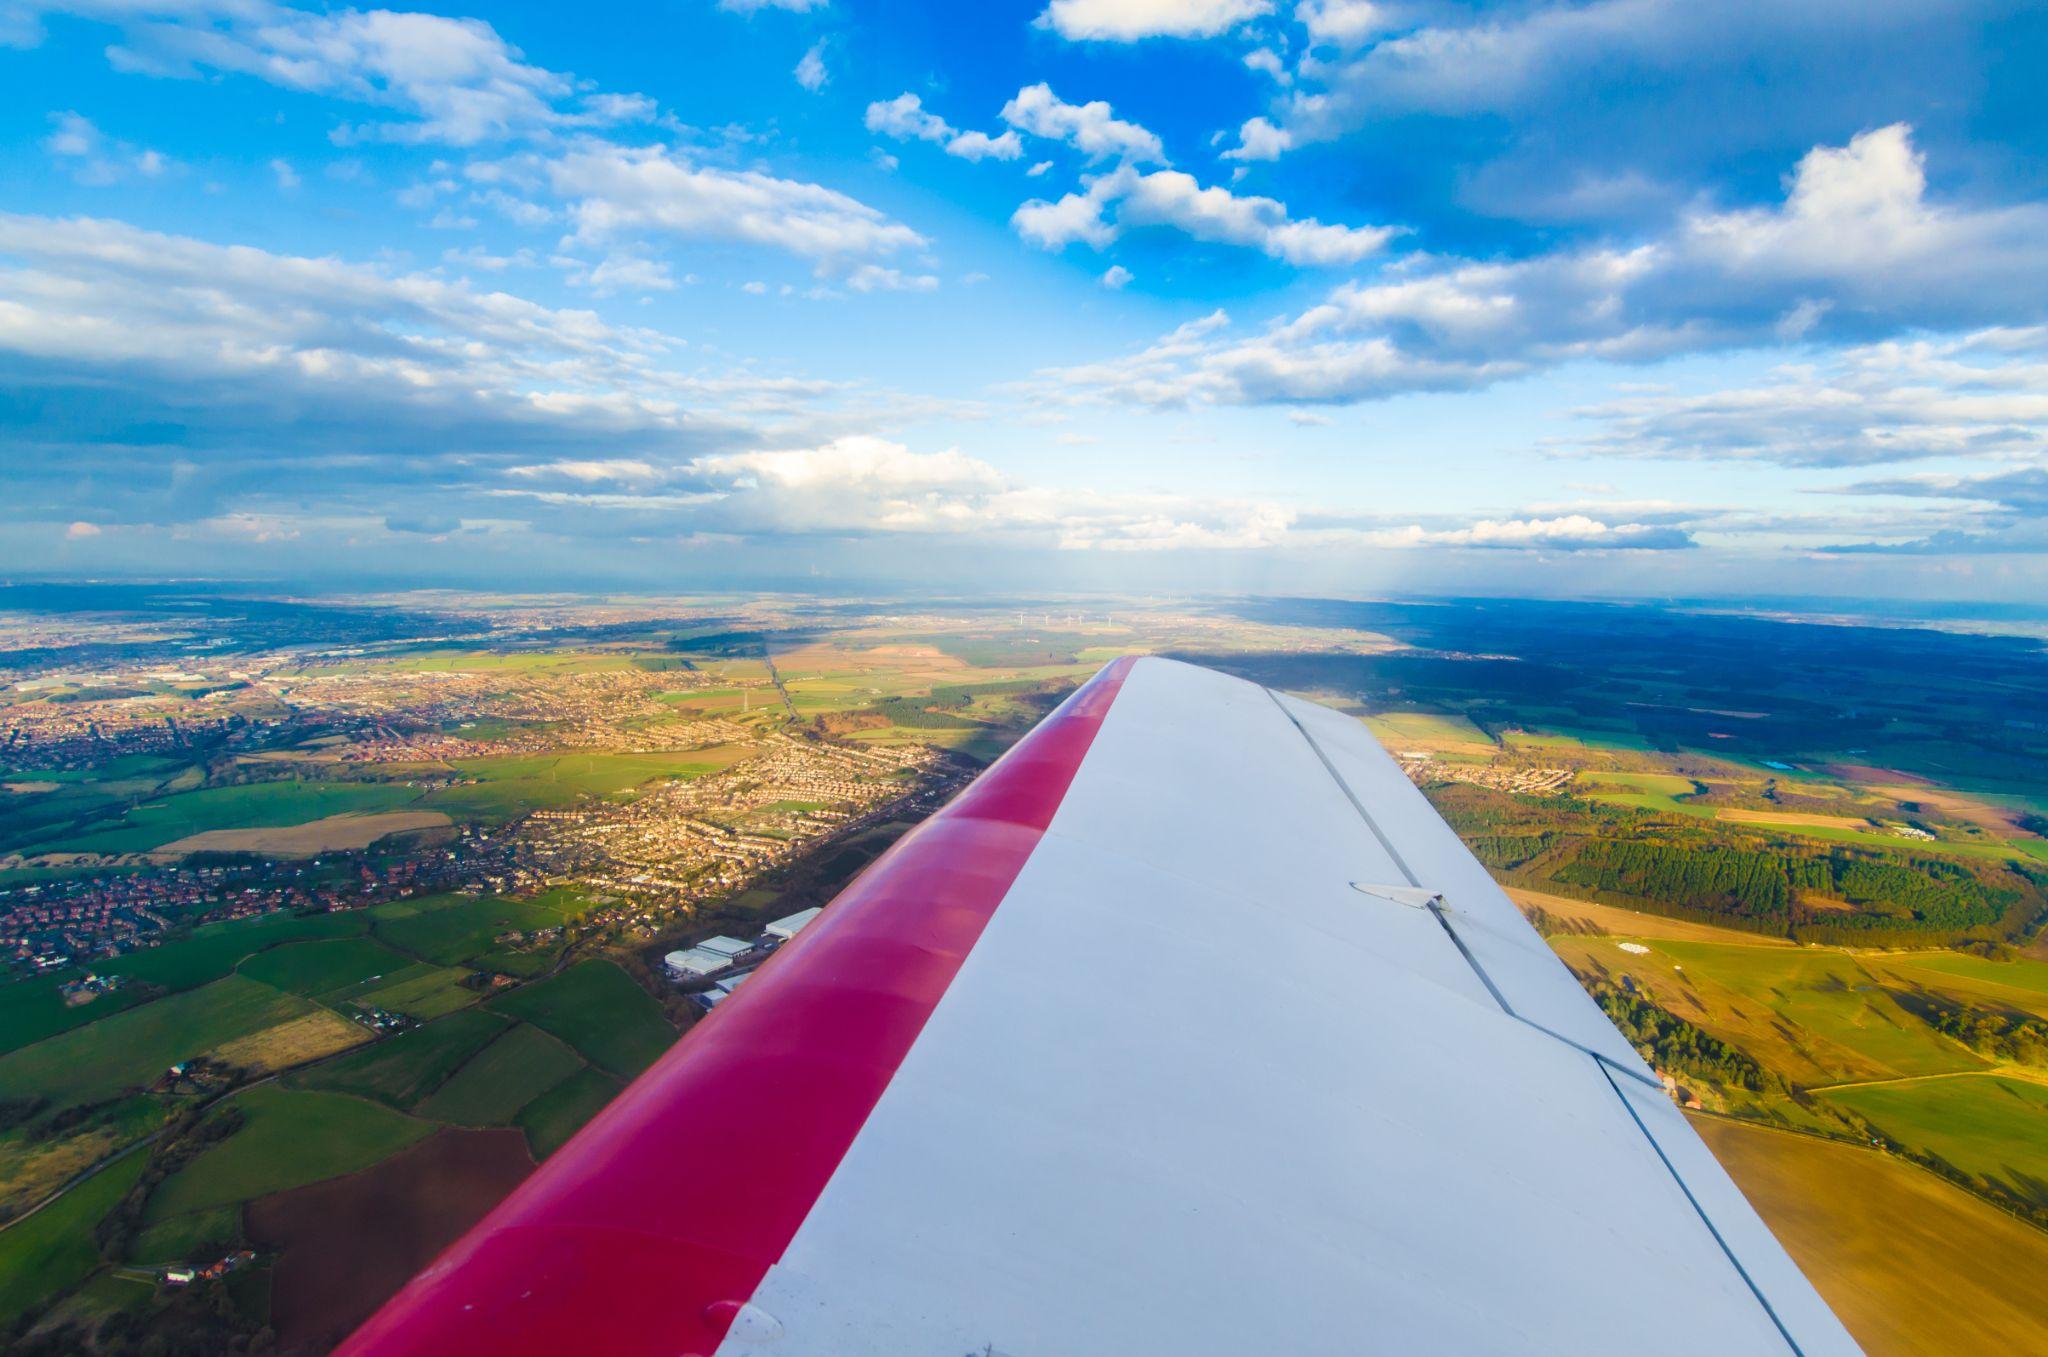 Aerial view of a plane wing flying over green fields